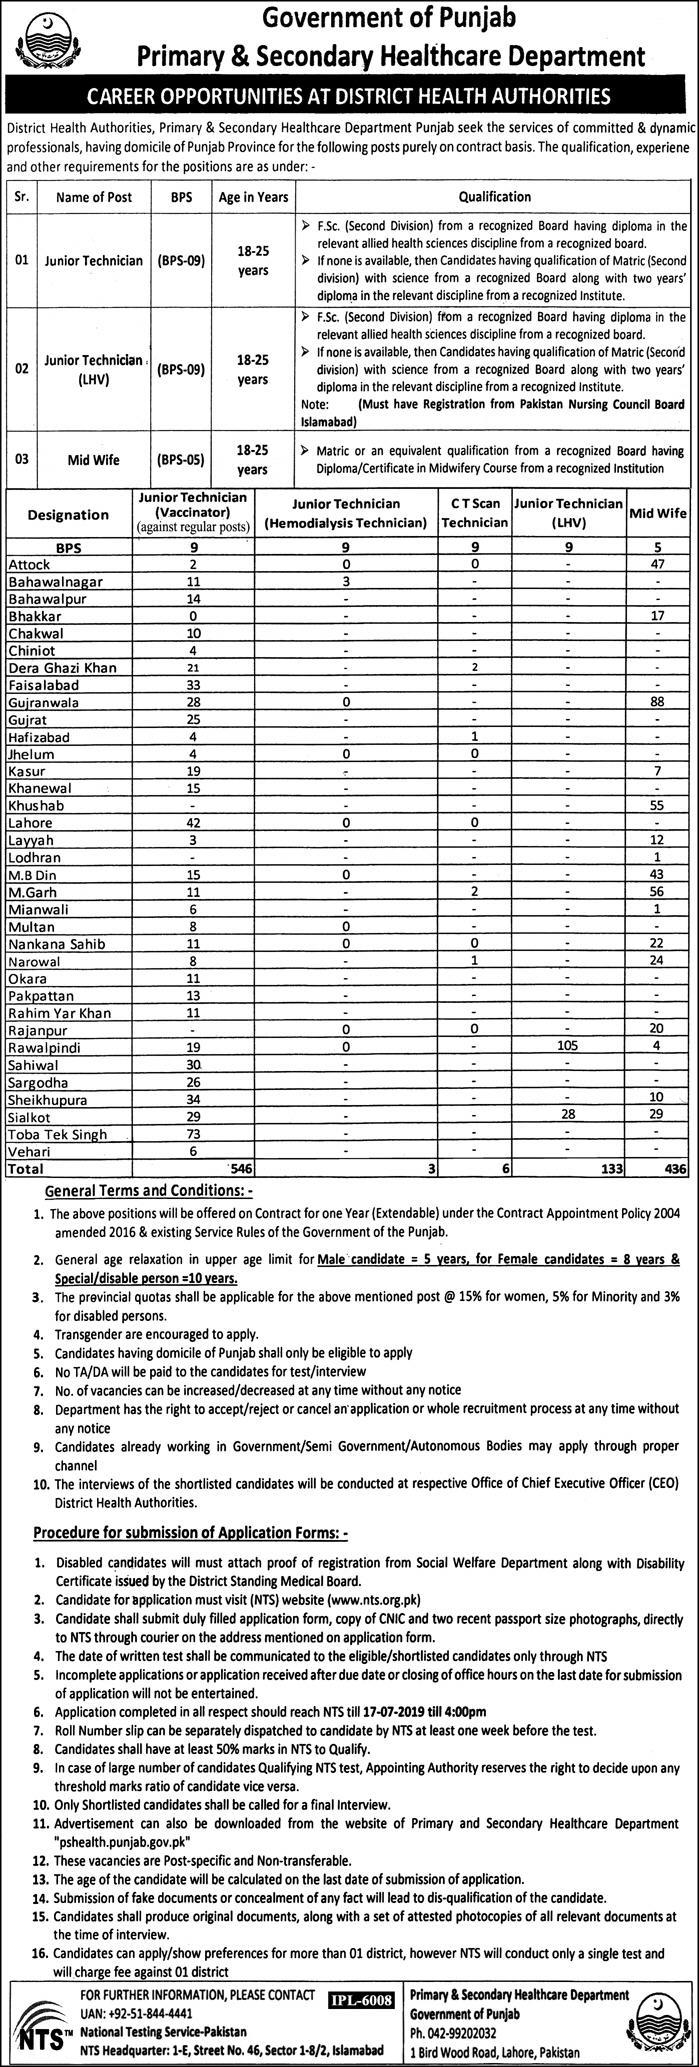 Primary and Secondary Healthcare Department jobs 2019